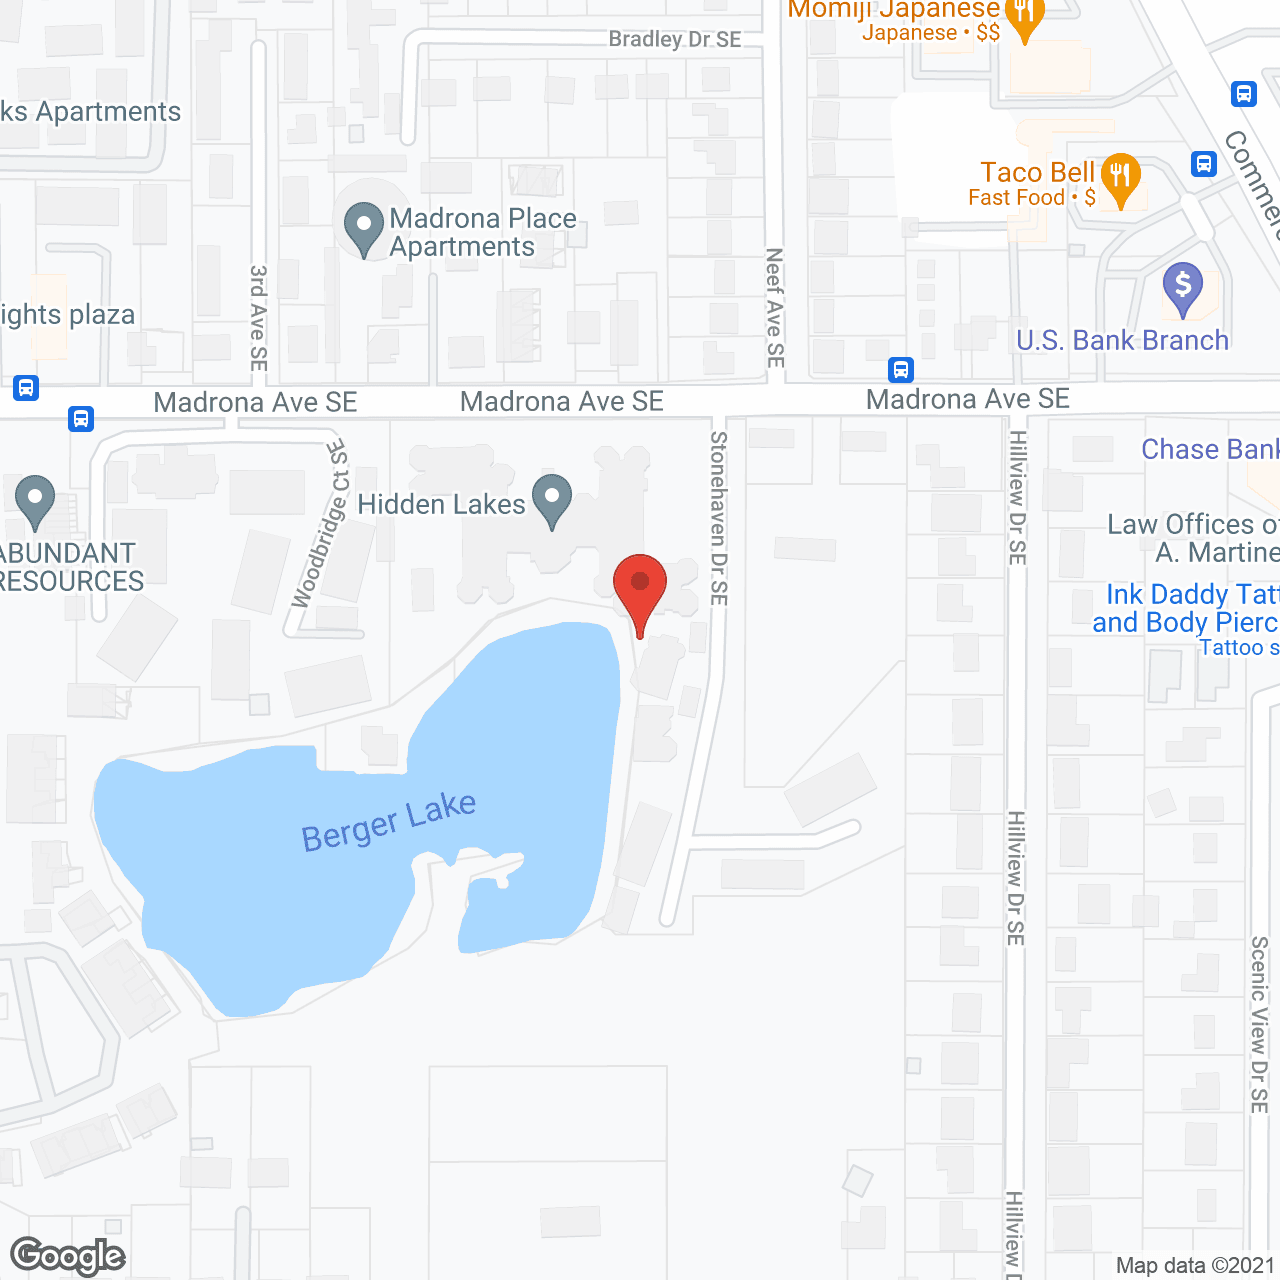 Holiday Hidden Lakes in google map